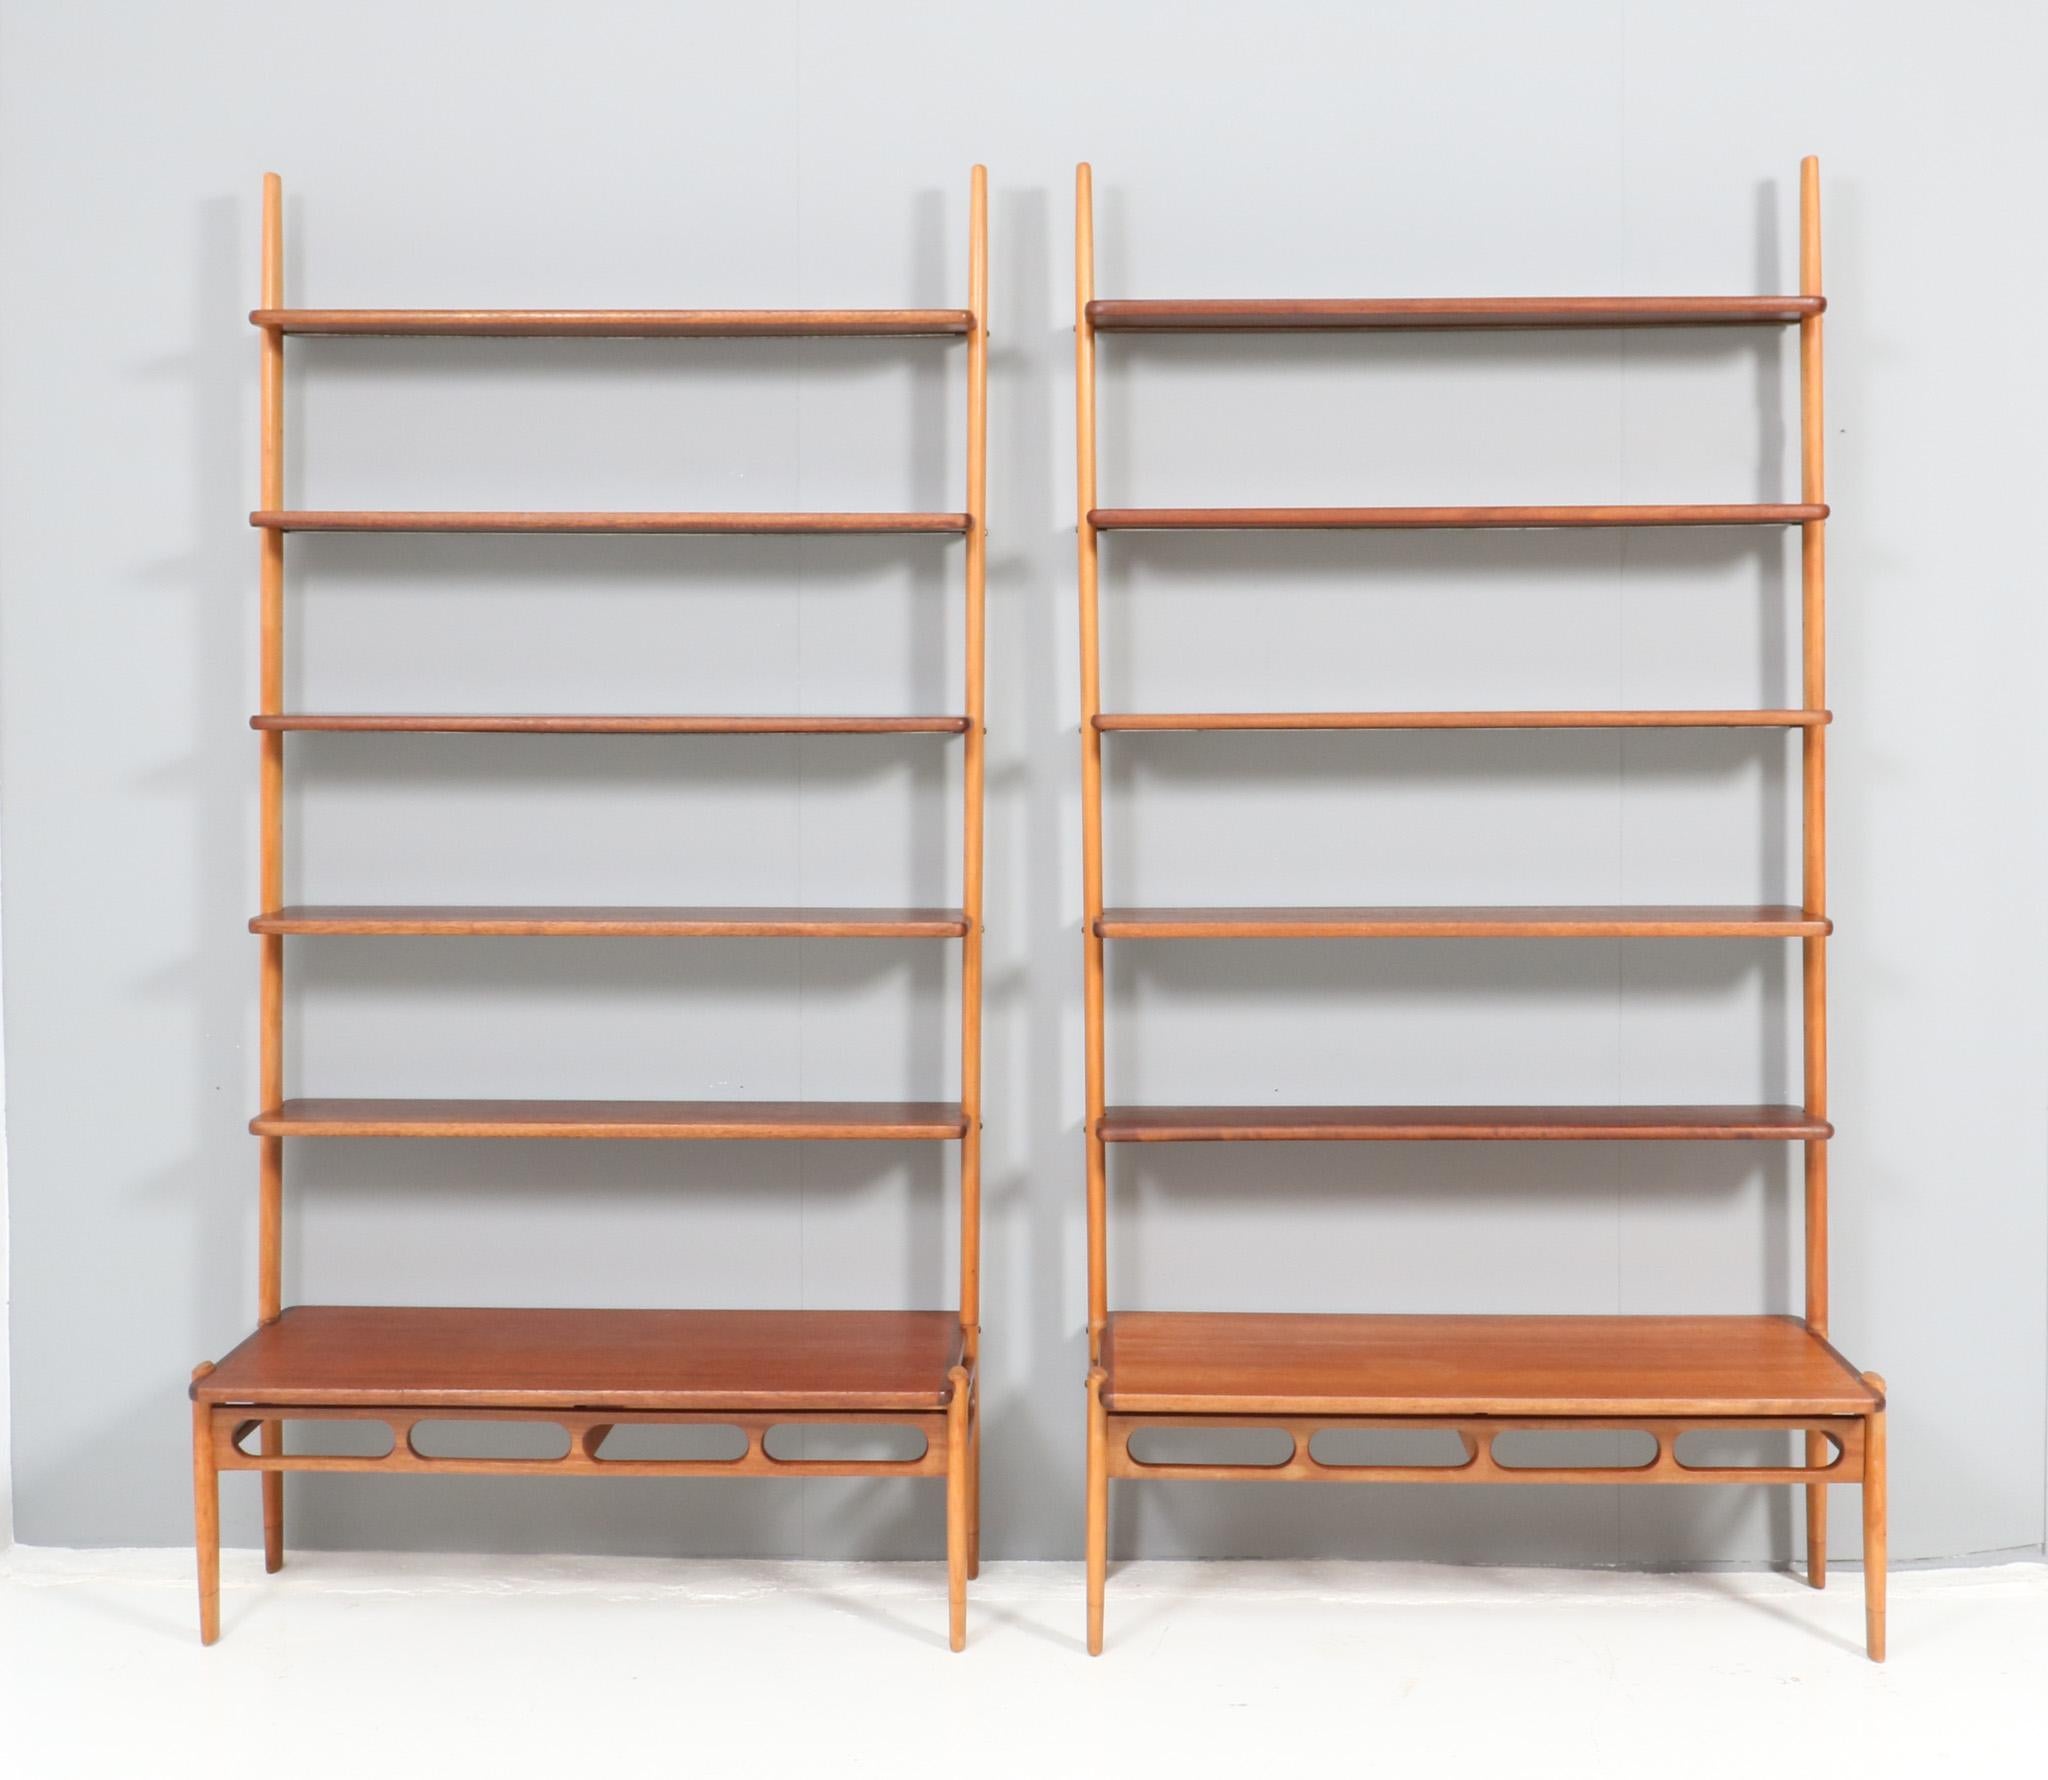 Dutch Mid-Century Modern Pair of Wall Units by William Watting for Scanflex, 1960s For Sale